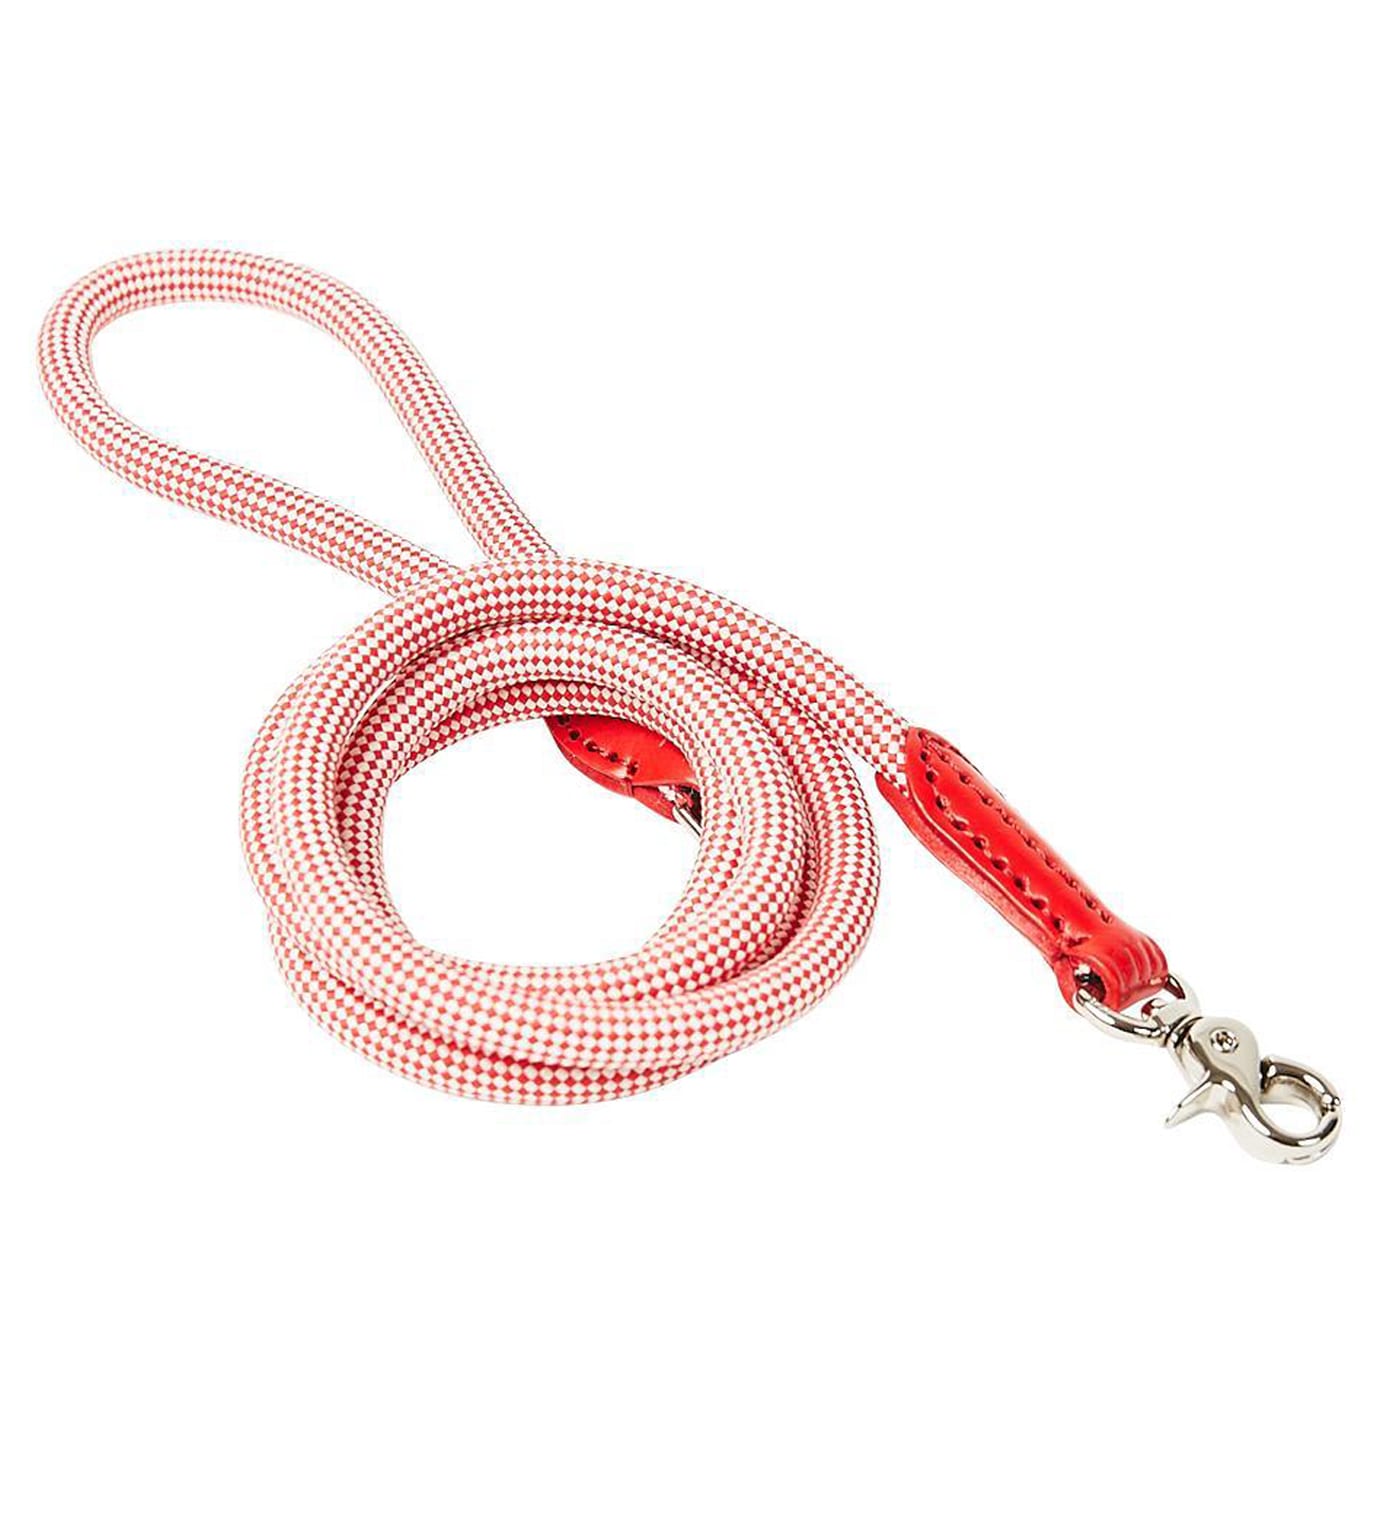 Harry Barker Bone Small Rope Dog Toy - Pink